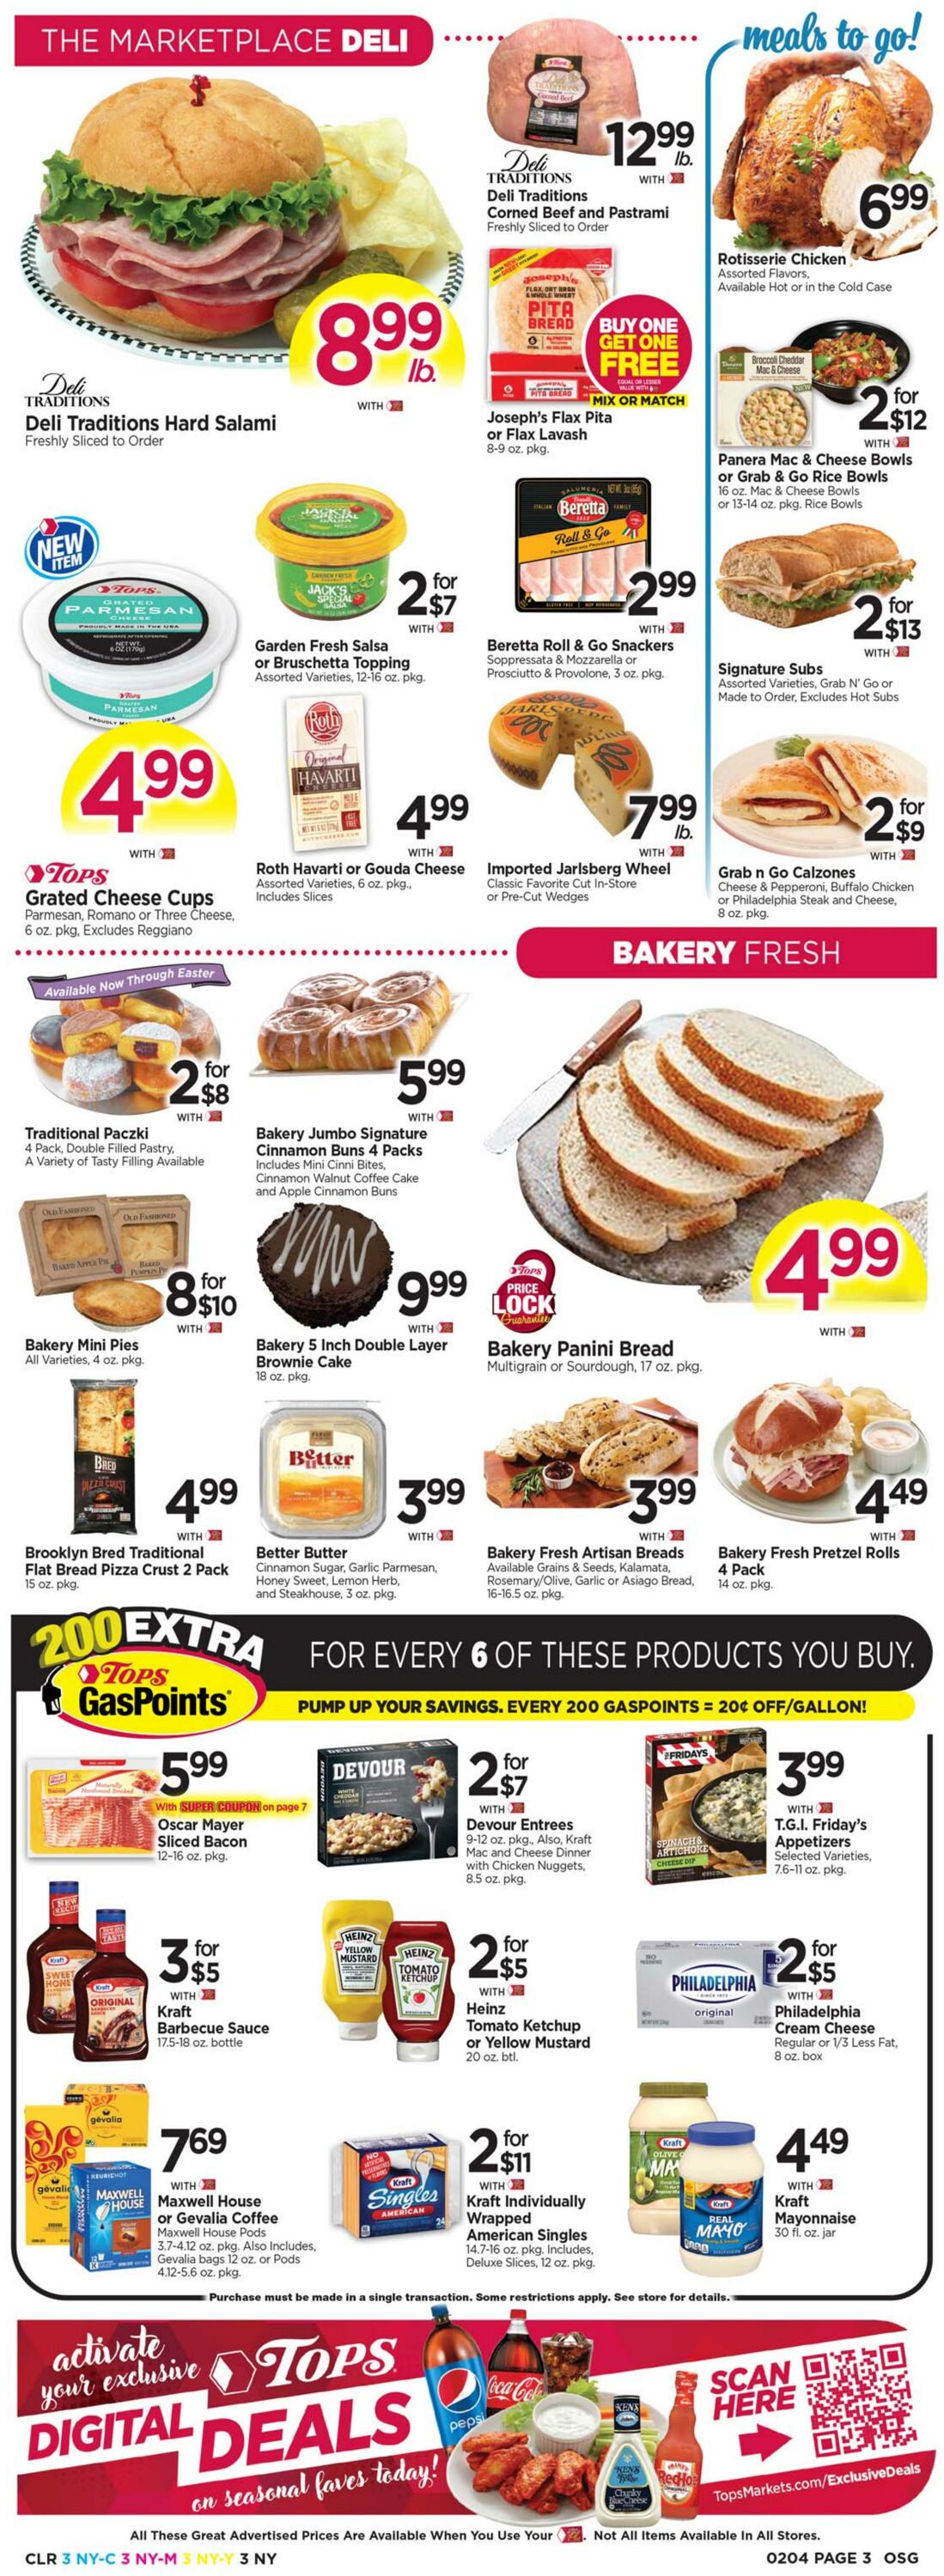 Weekly ad Tops Friendly Markets 01/29/2023 - 02/04/2023